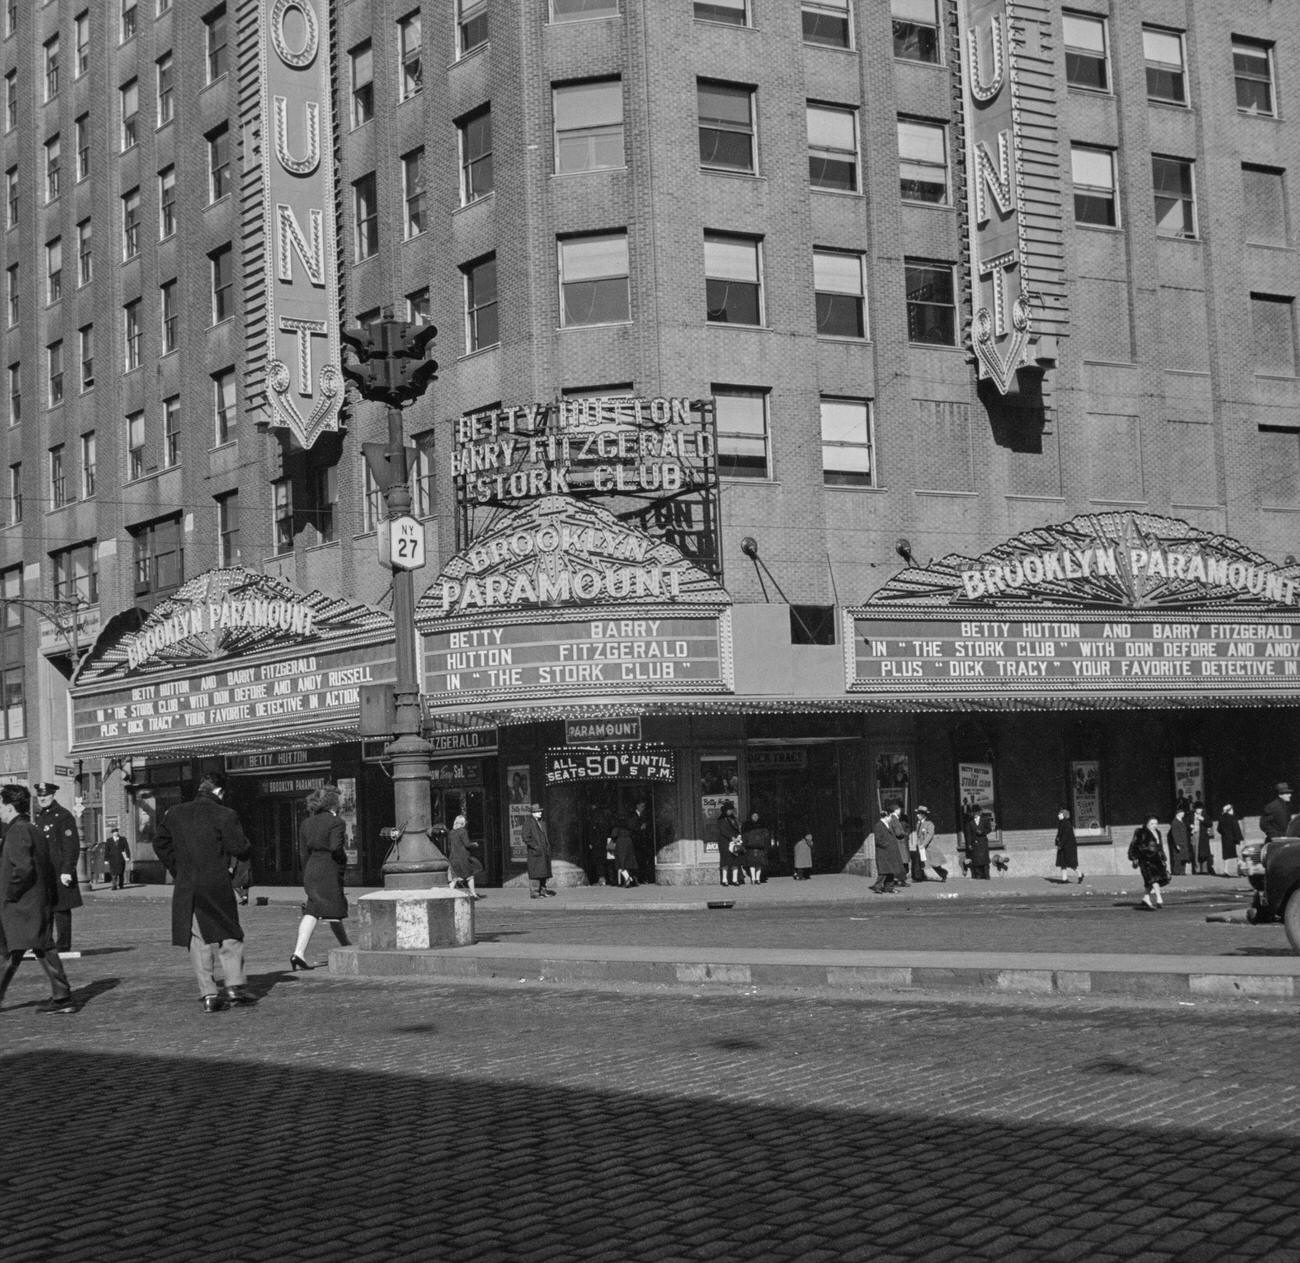 Marquee Of Brooklyn Paramount Theater Advertises 'The Stork Club', 1945.